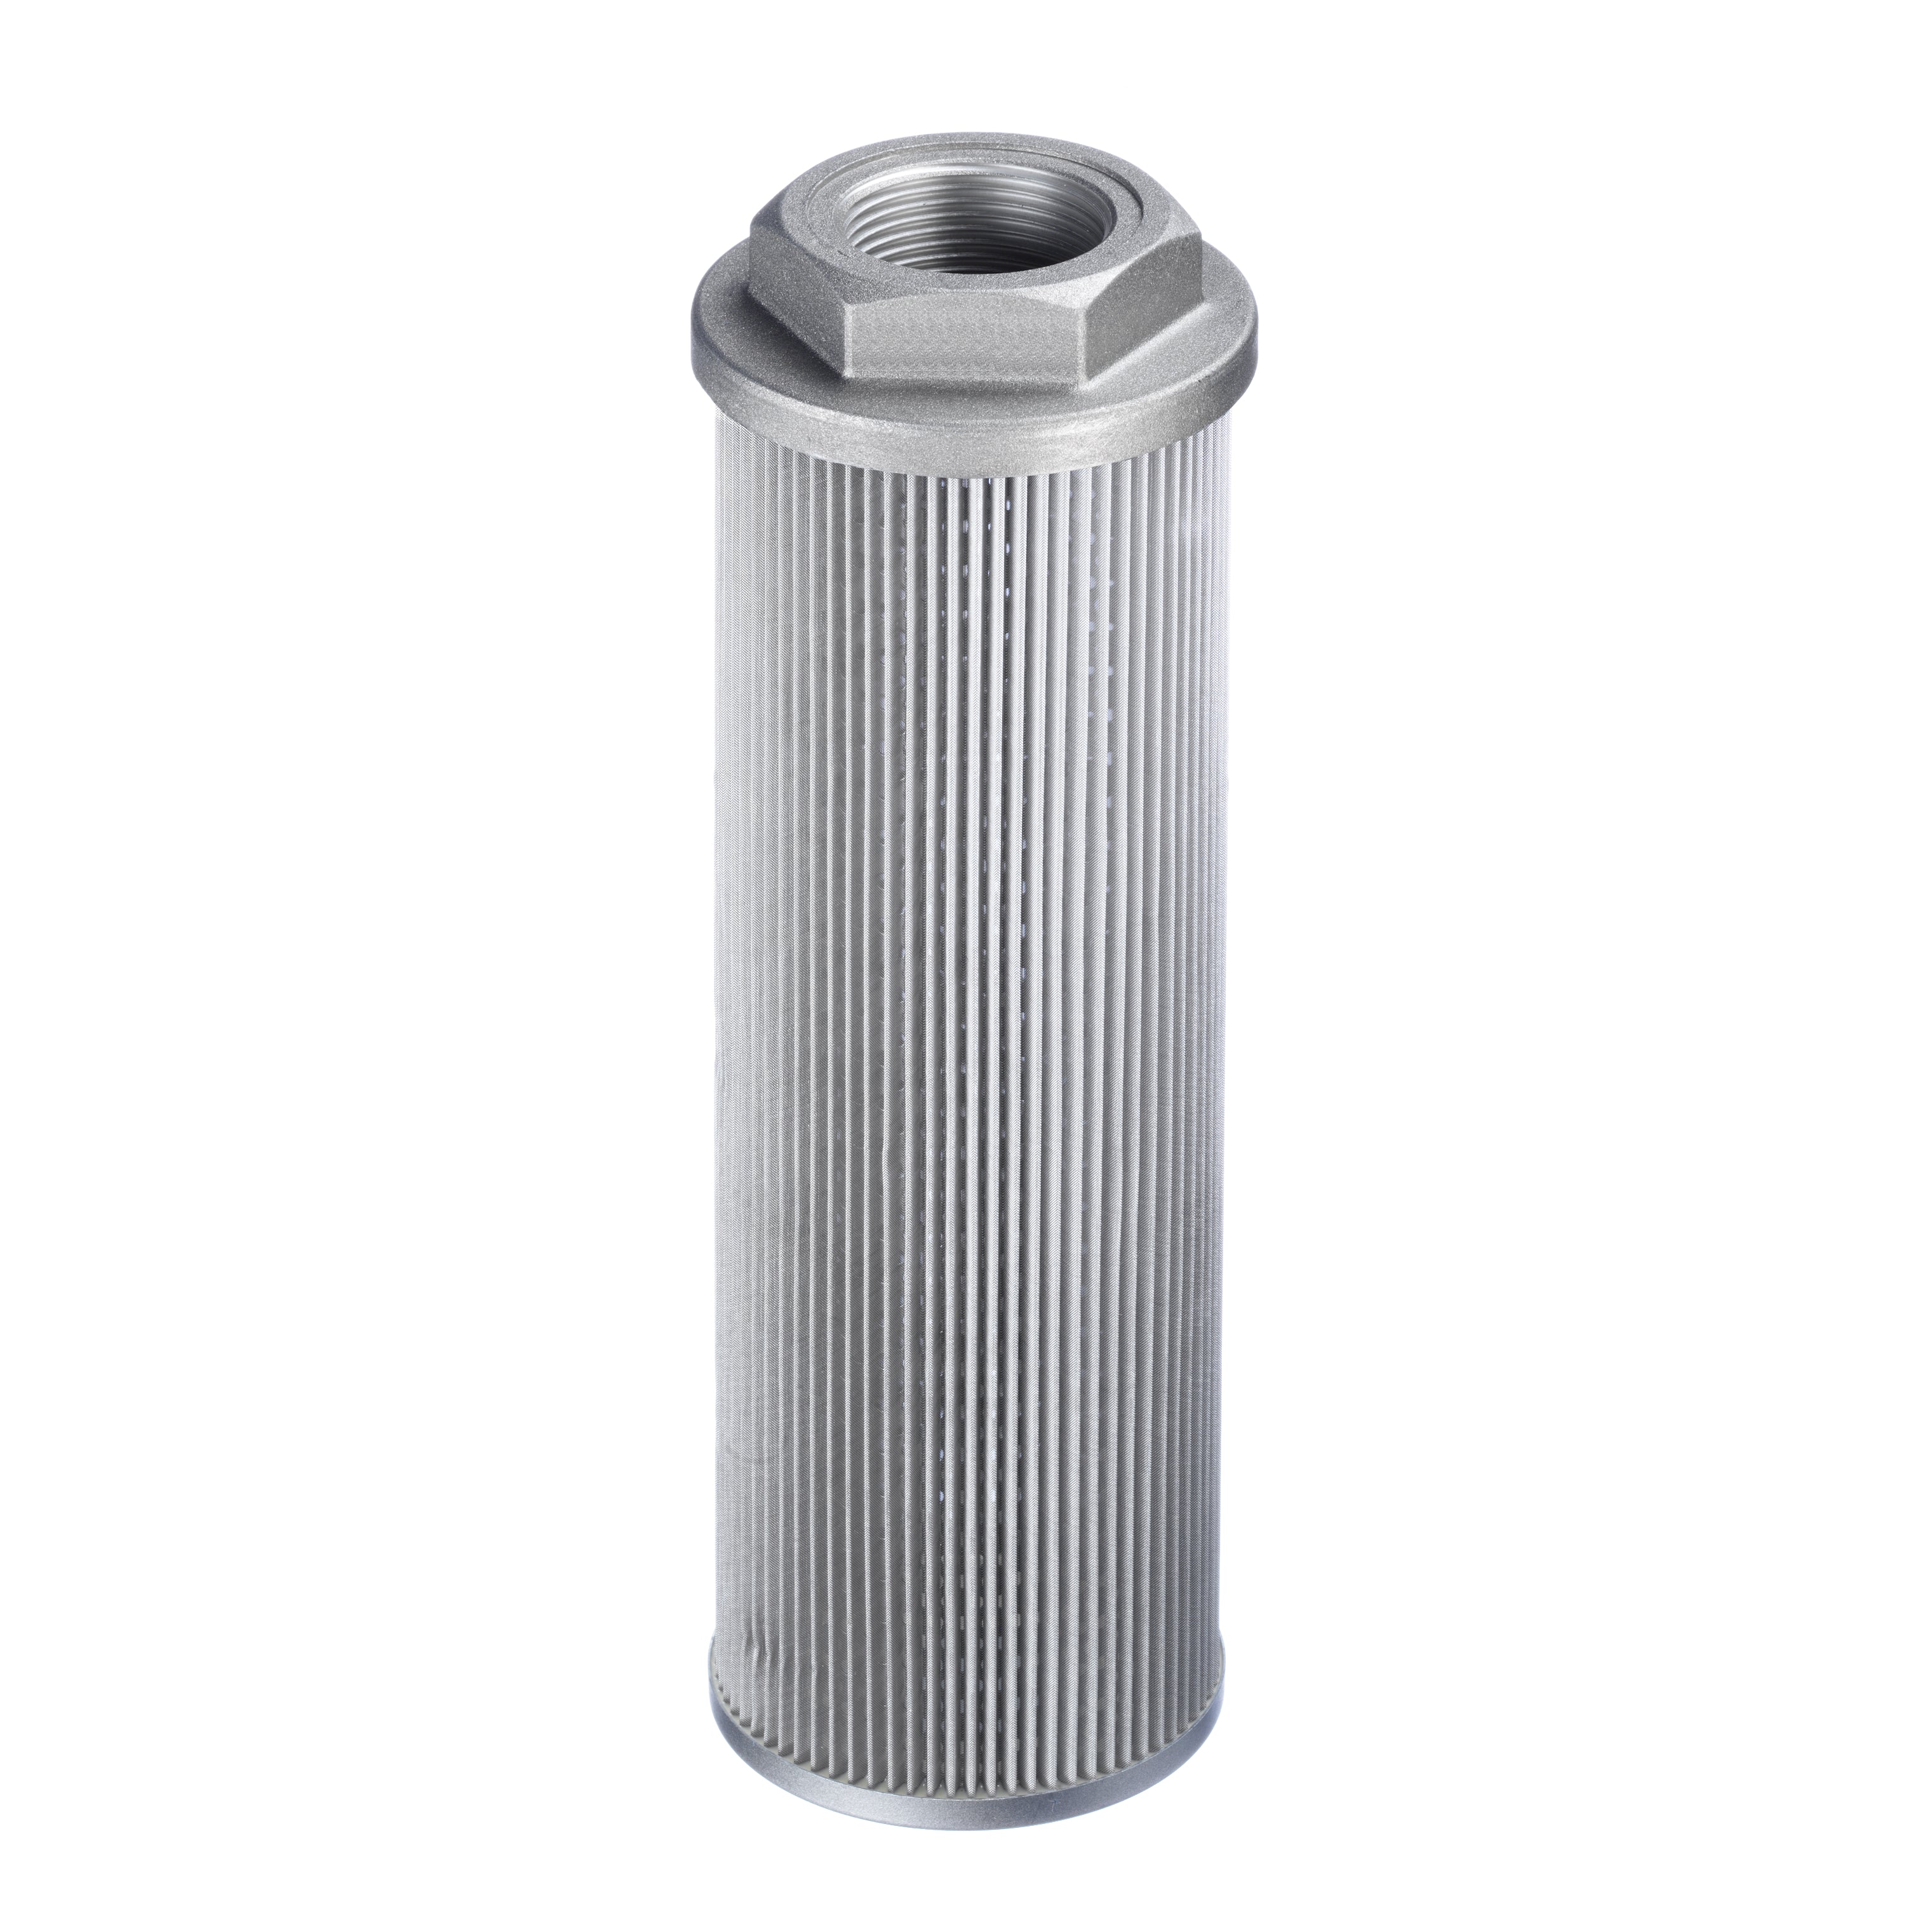 SUS-088-N24-260-125-A-B0.2 : Stauff Suction Strainer, Aluminum End Cap, 1.5" NPT, 36.4GPM, 125 Micron, 3psi Bypass